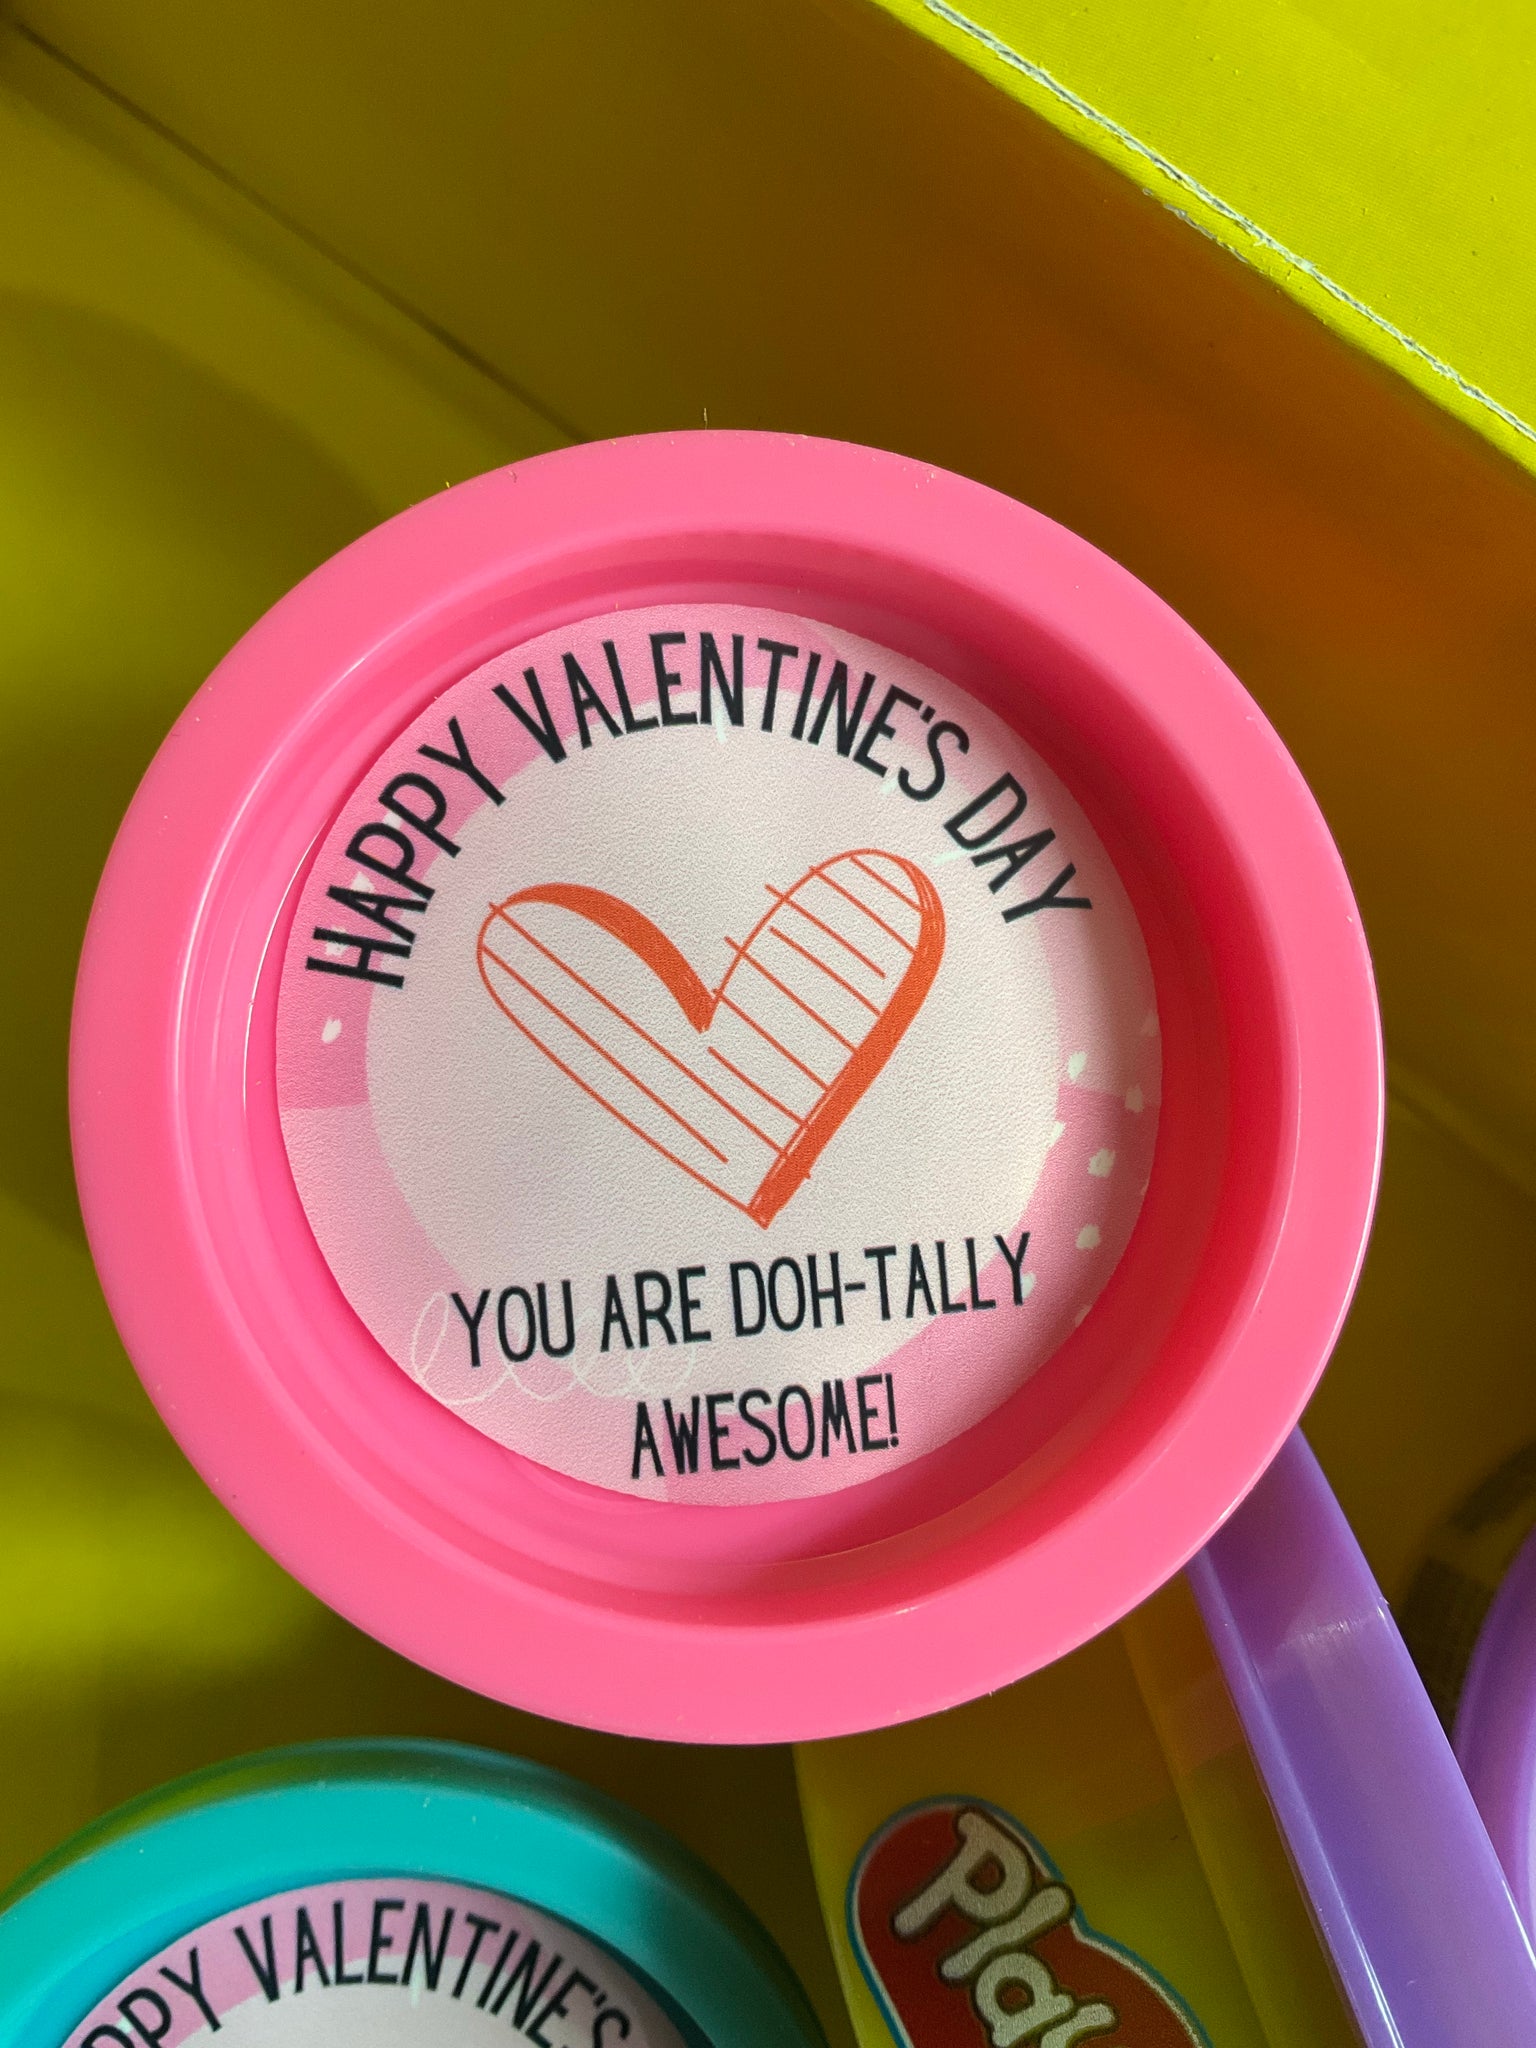 Mini play-doh Valentine's Day gift – Beyond Laser Creations